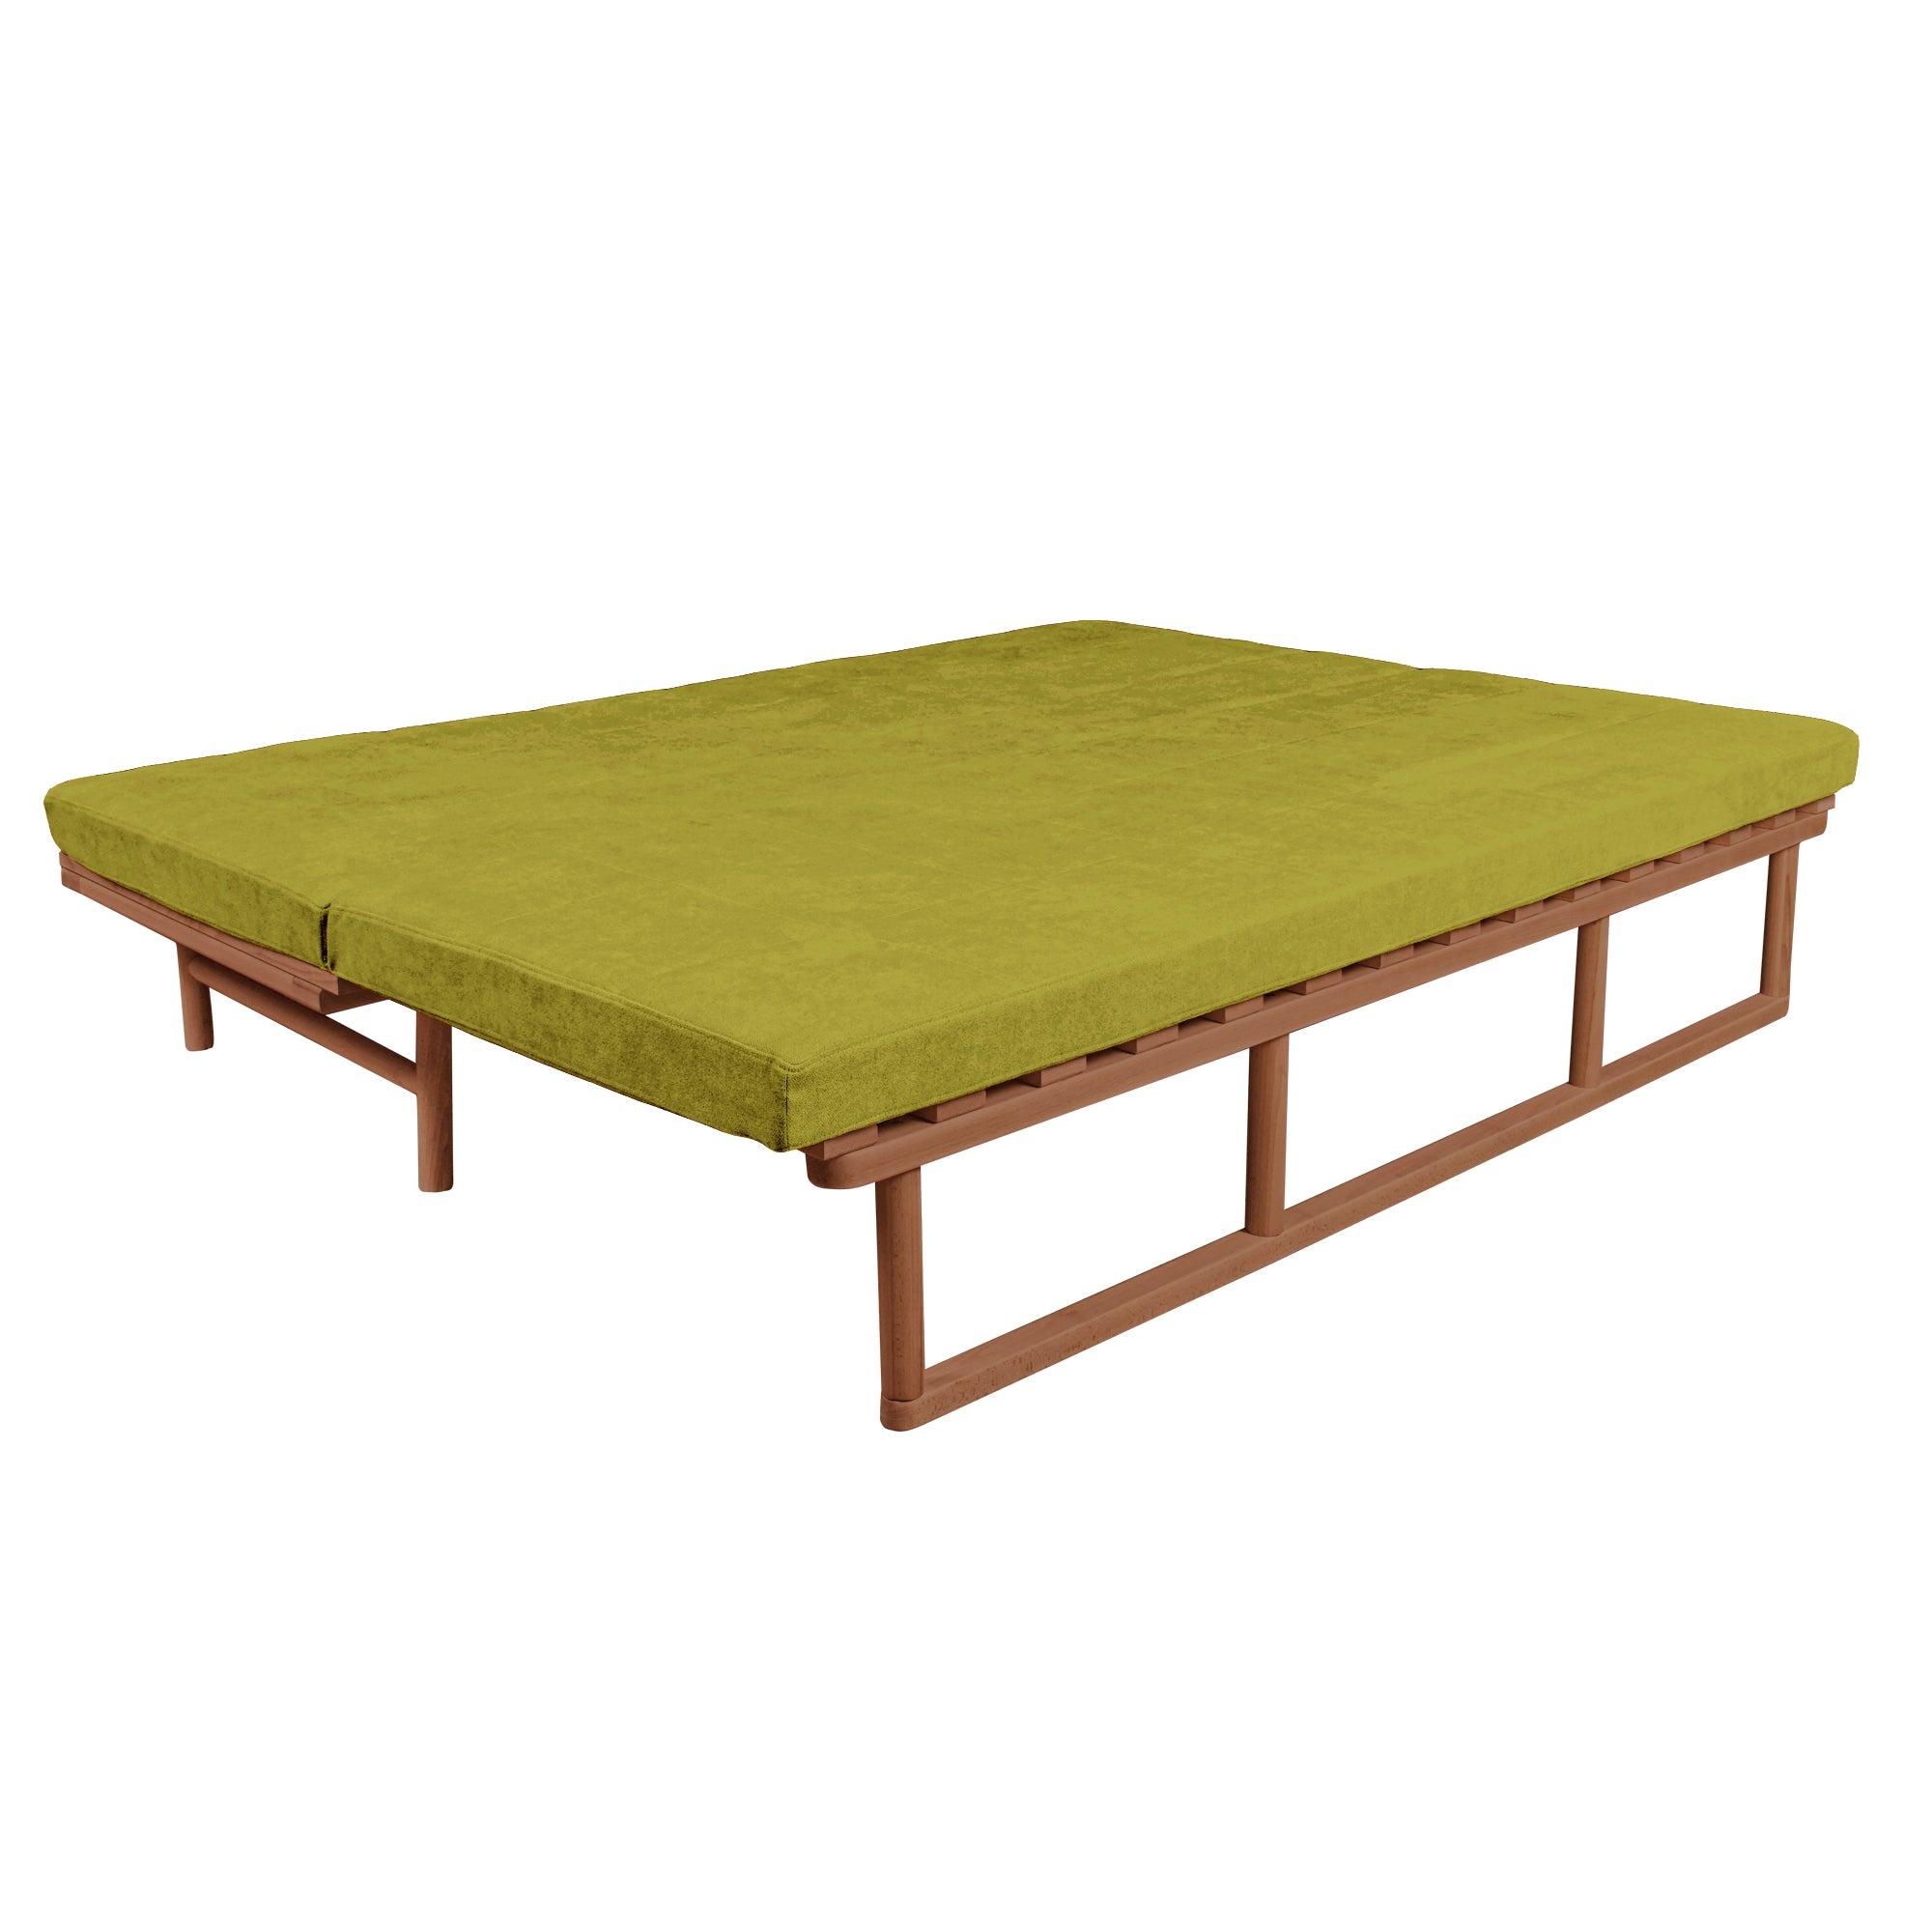 Le MAR Folding Daybed, Beech Wood Frame, Caramel Colour-green upholstery-folded view